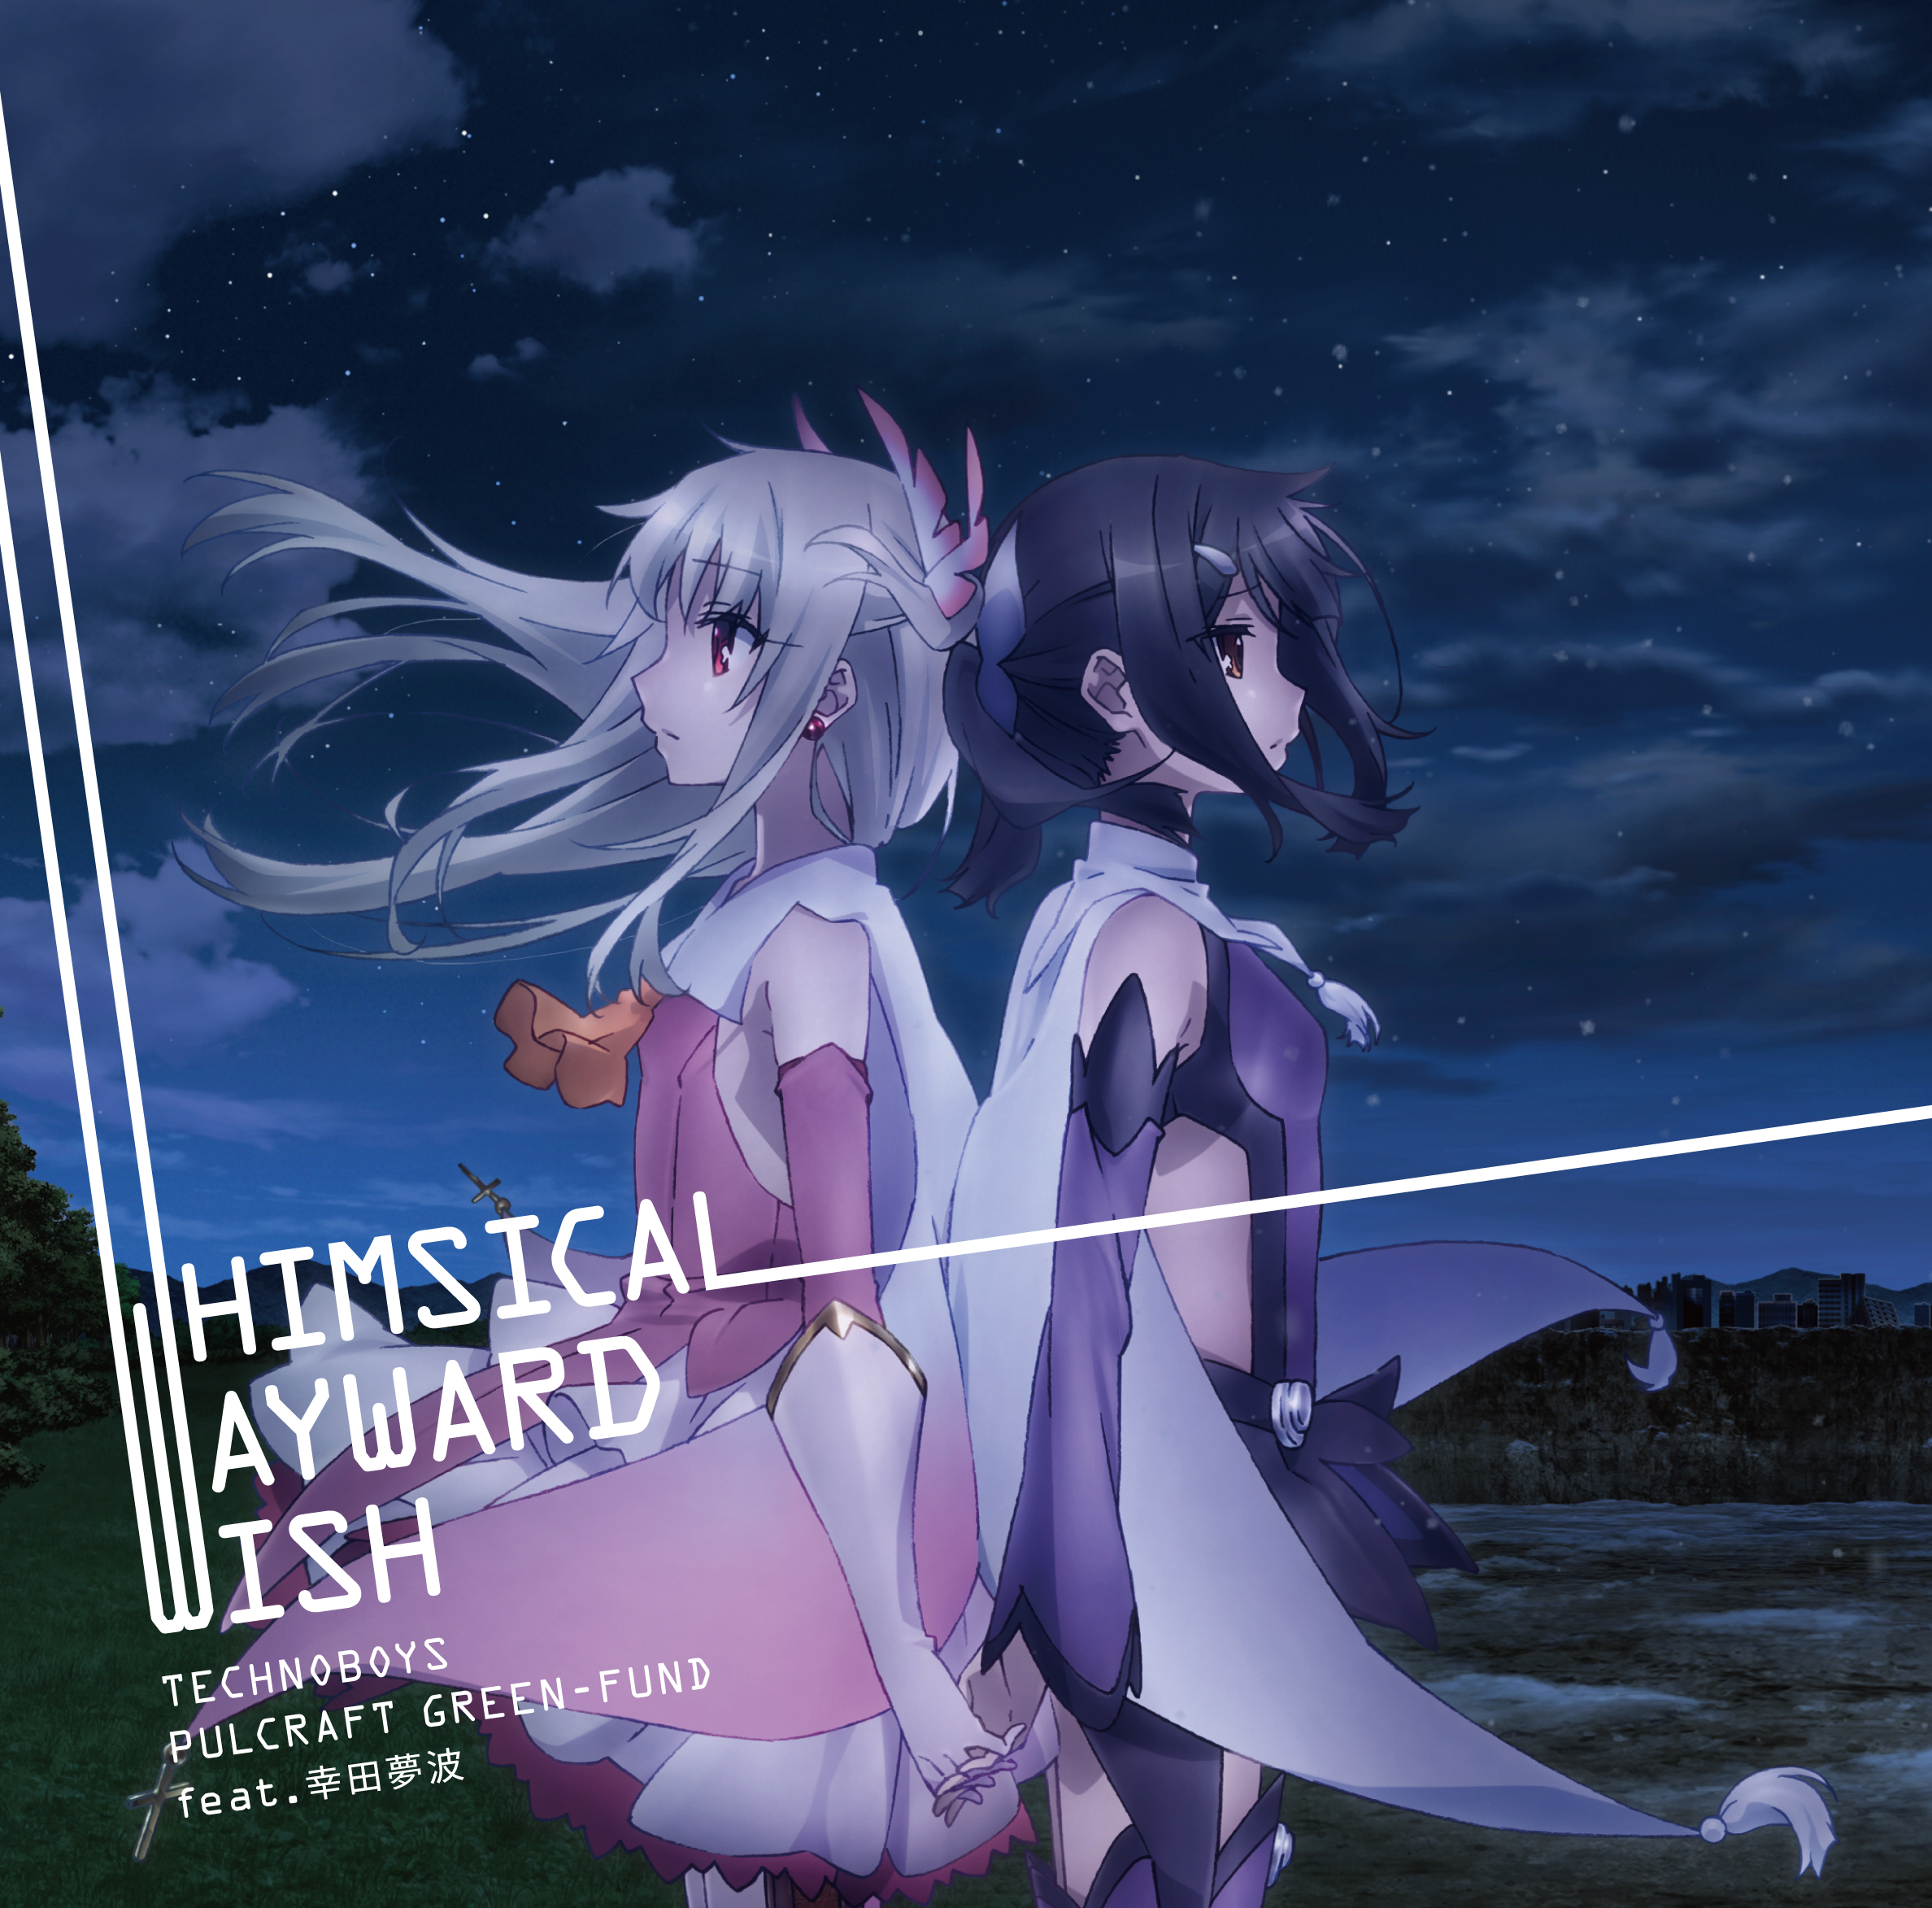 TECHNOBOYS PULCRAFT GREEN-FUND feat. 幸田夢波「WHIMSICAL WAYWARD WISH」レビュー - 画像一覧（2/2）